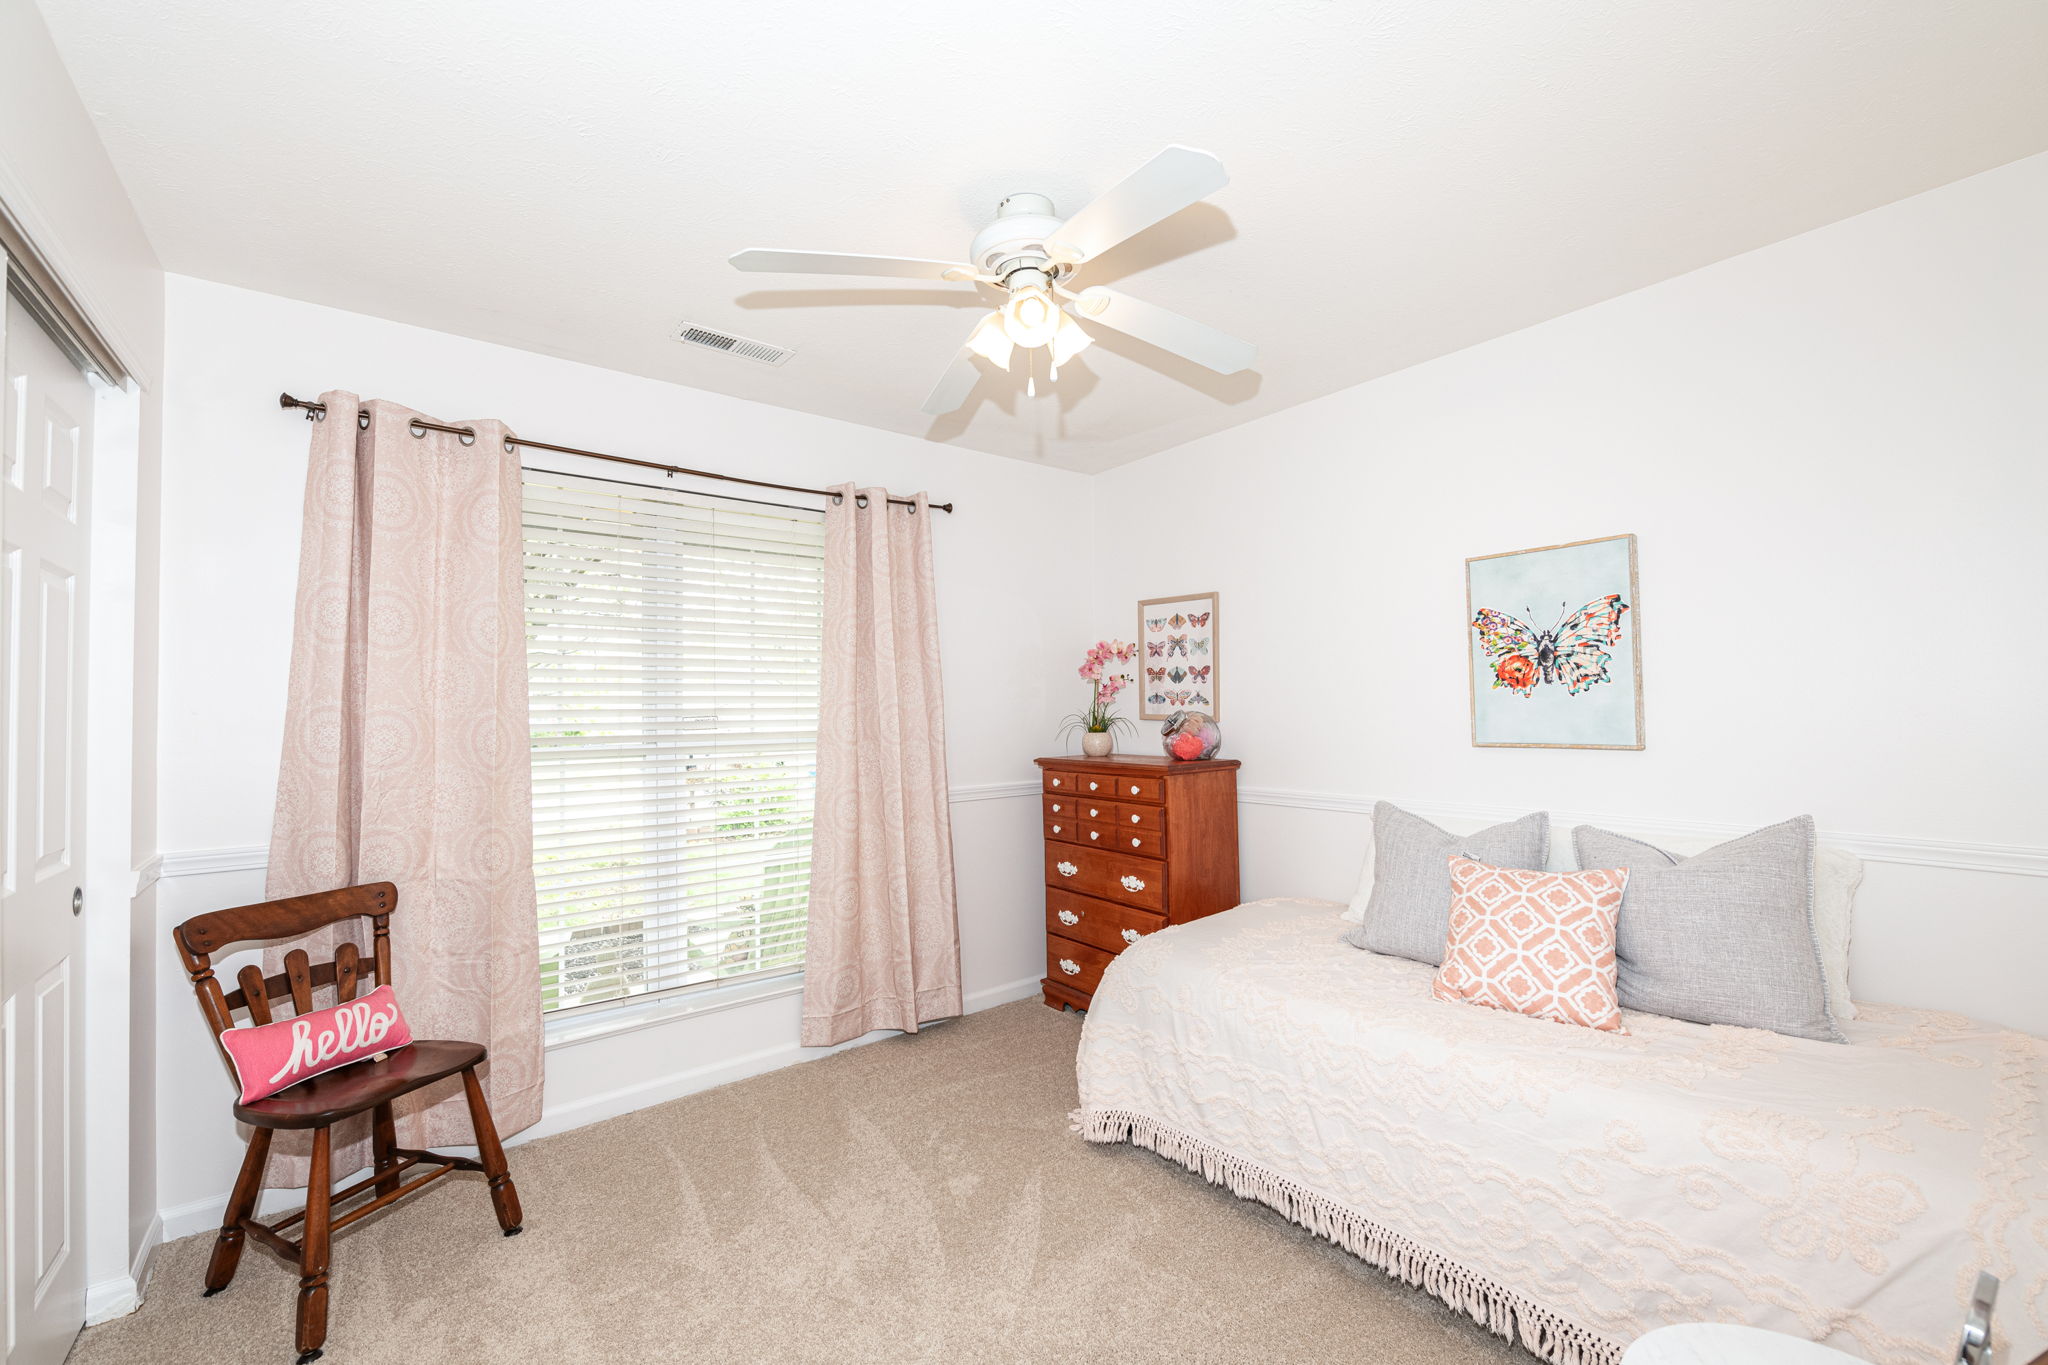 Front bedroom with double window overlooks front porch. Overhead lighting provided by ceiling fan with light kit.